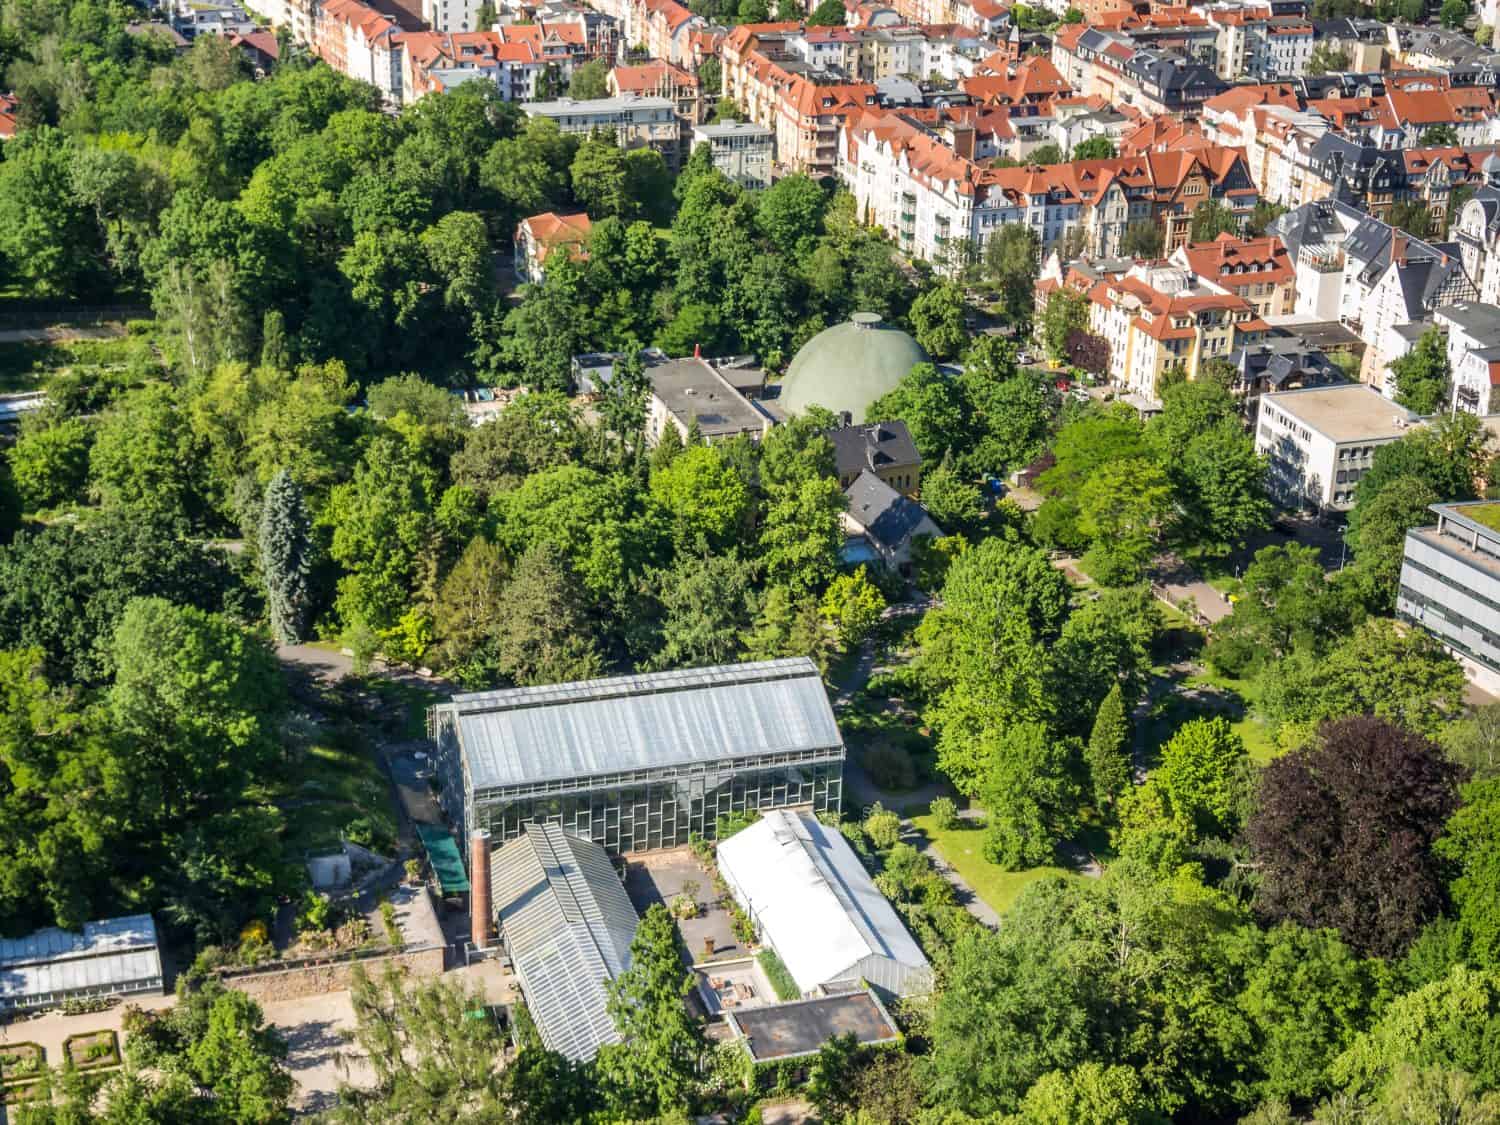 Botanical Garden in Jena from above